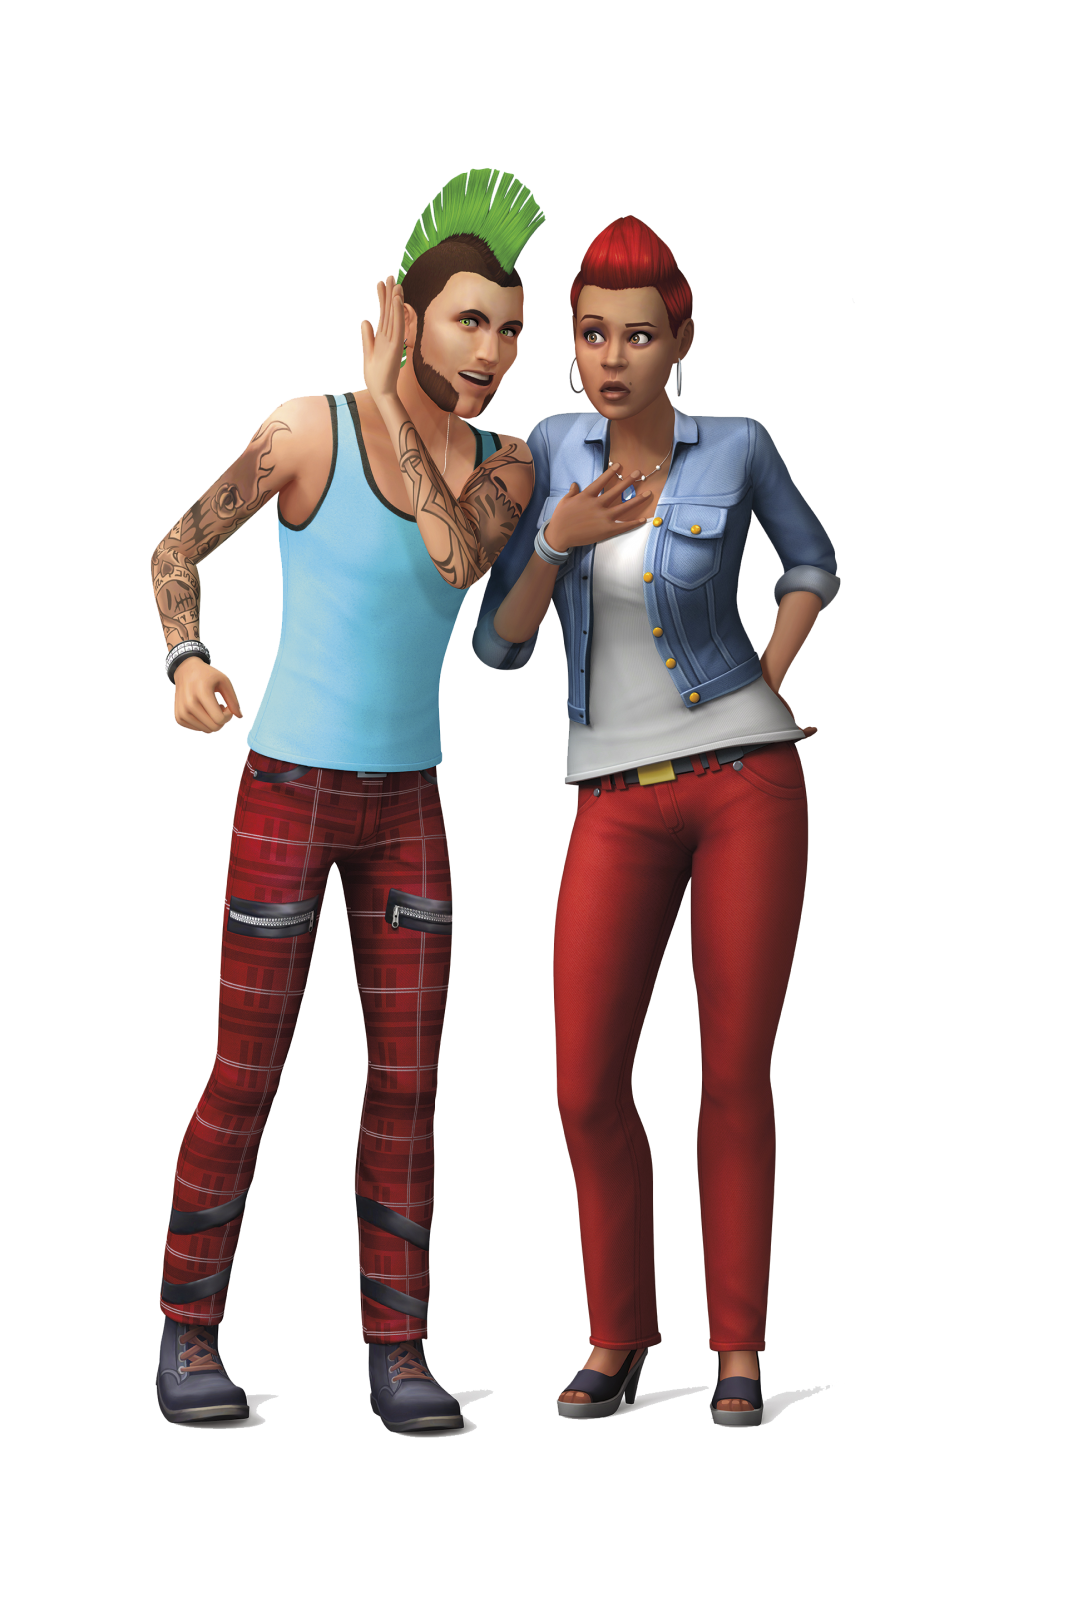 The Sims 4: Two New Renders | SimsVIP